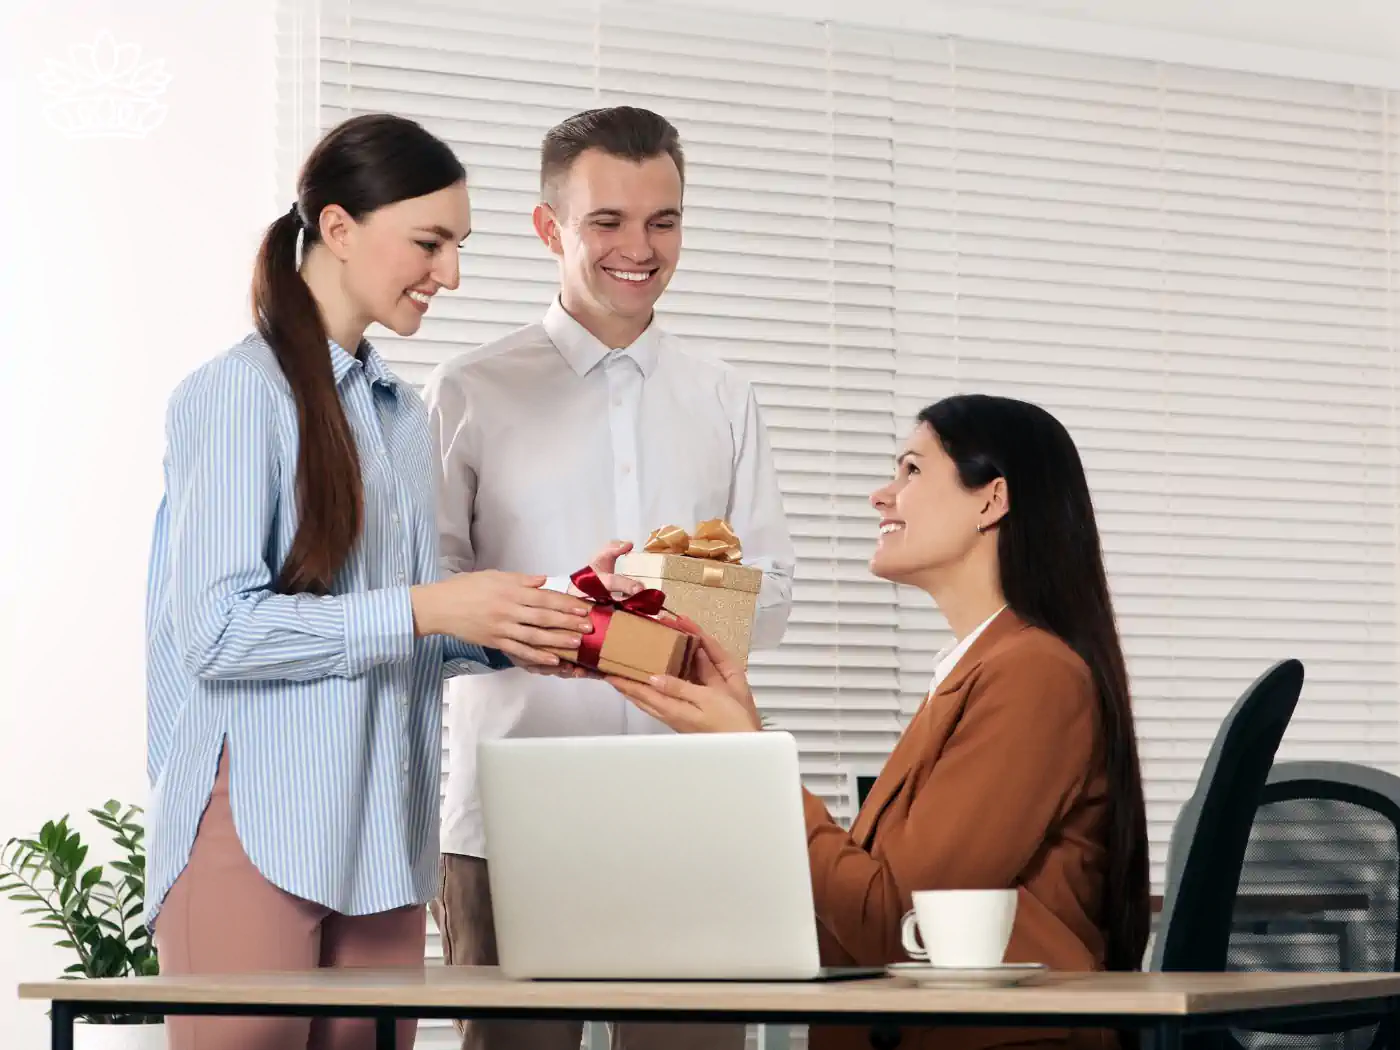 Two colleagues presenting a gift box with a red ribbon to a smiling seated woman in an office, creating a moment of joy and appreciation. The setting conveys a professional yet warm atmosphere, perfect for fostering connections. Gift boxes for colleagues, delivered with heart by Fabulous Flowers and Gifts.